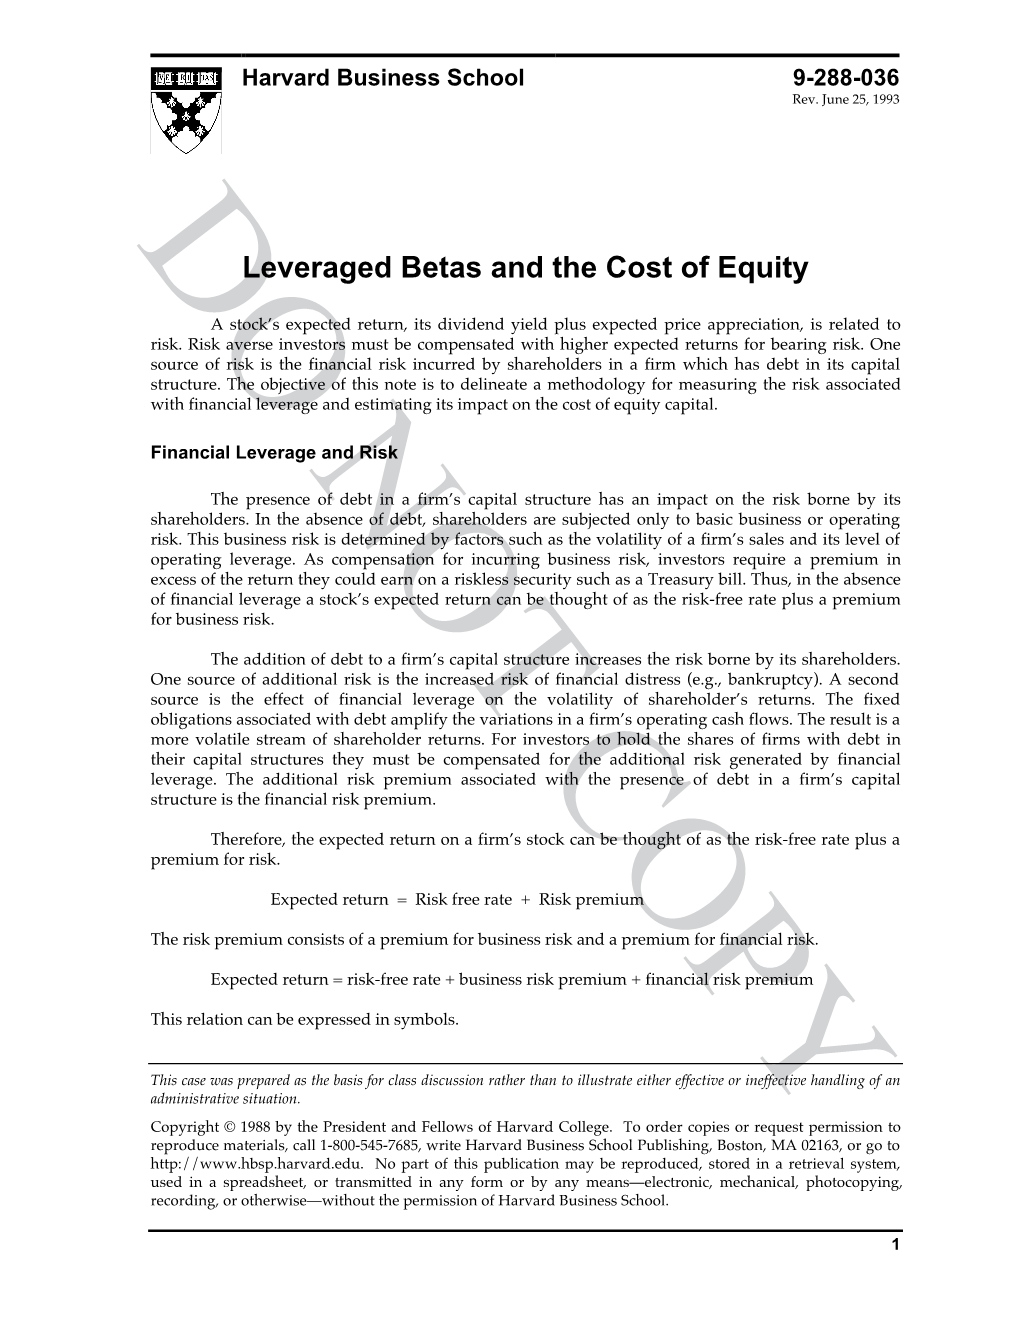 Leveraged Betas and the Cost of Equity